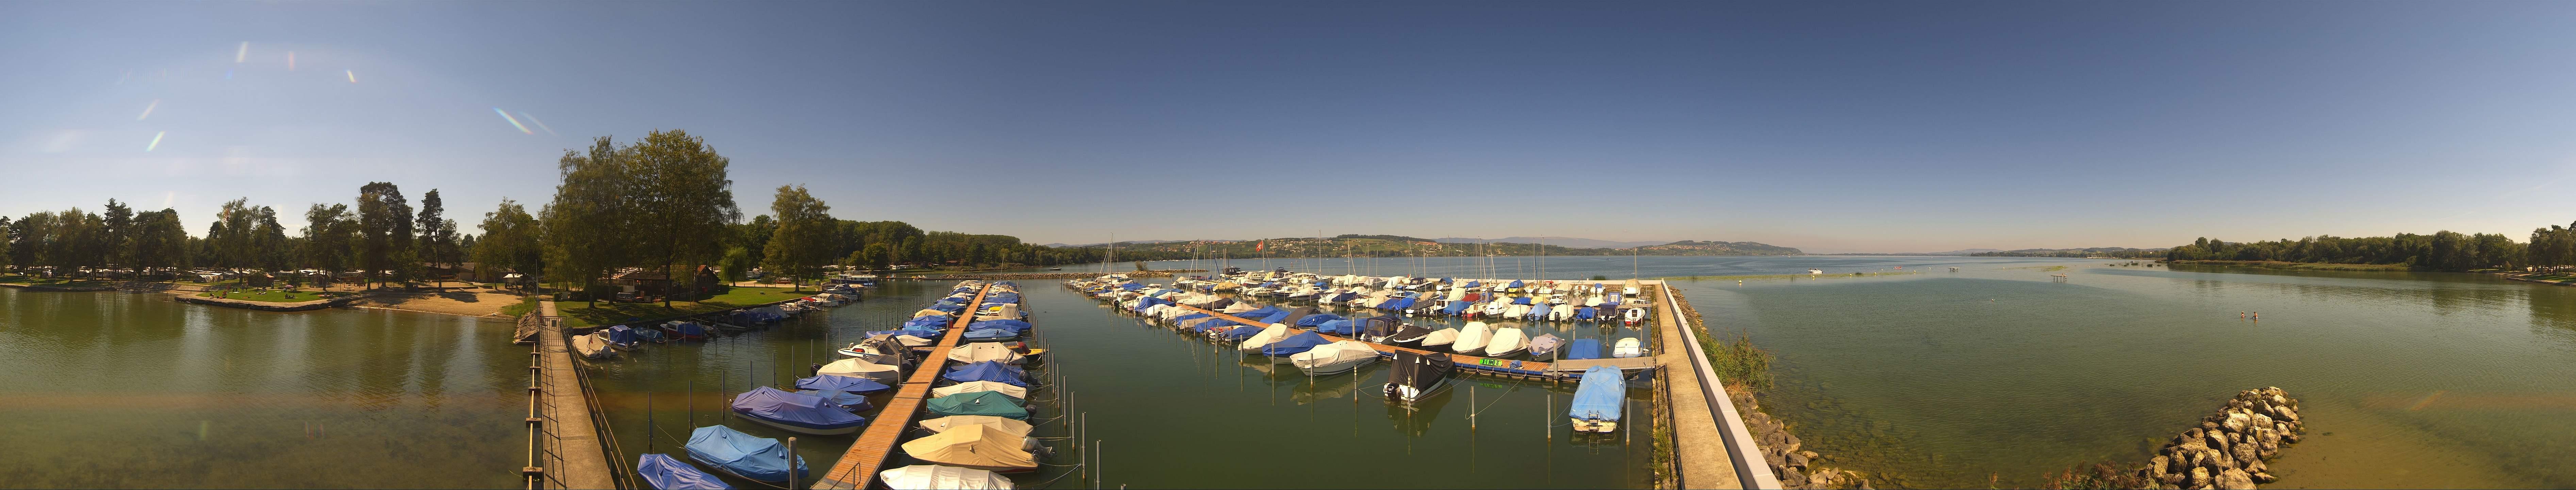 Webcam Avenches Camping Plage